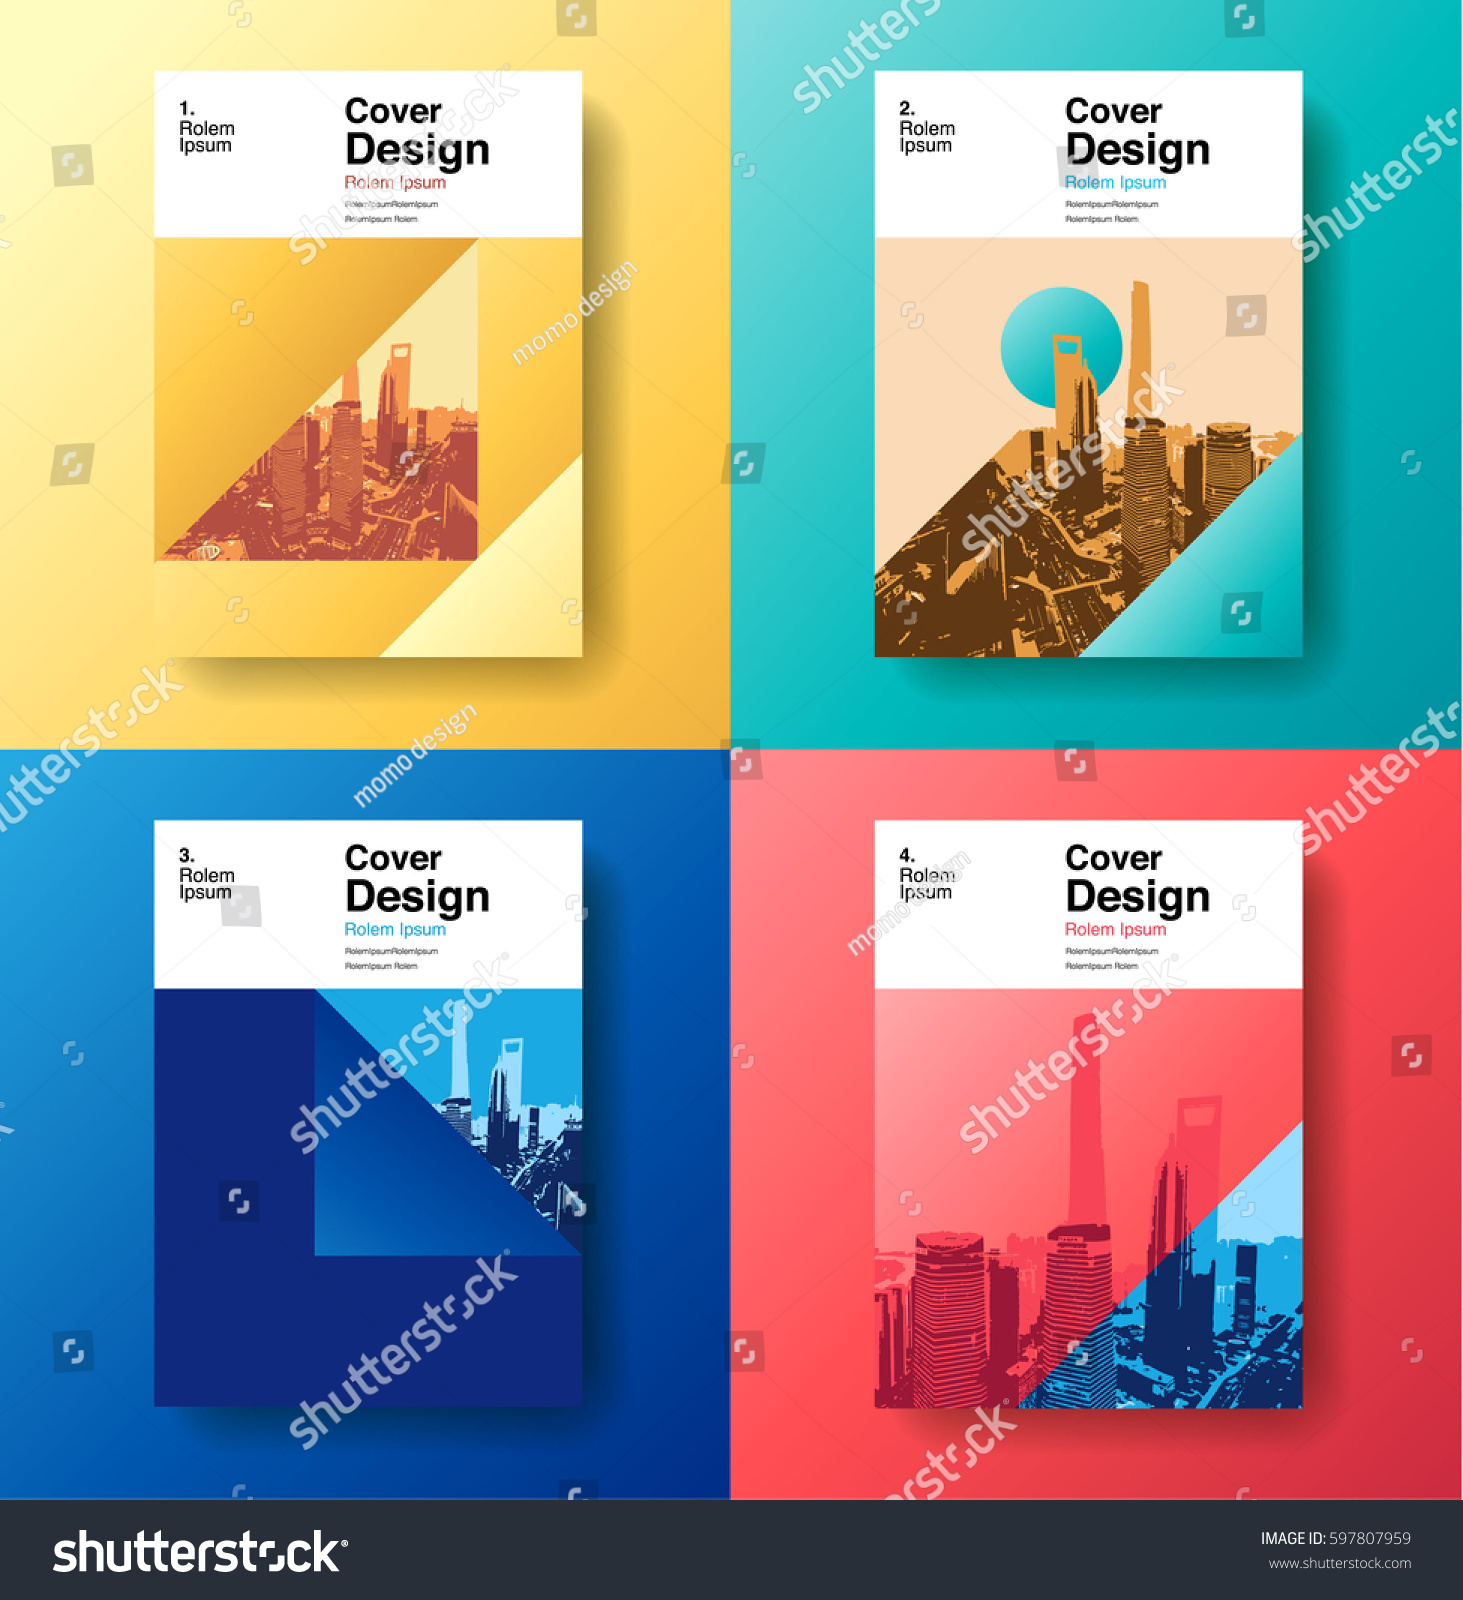 cover-book-designfuture-business-template-layout-stock-vector-royalty